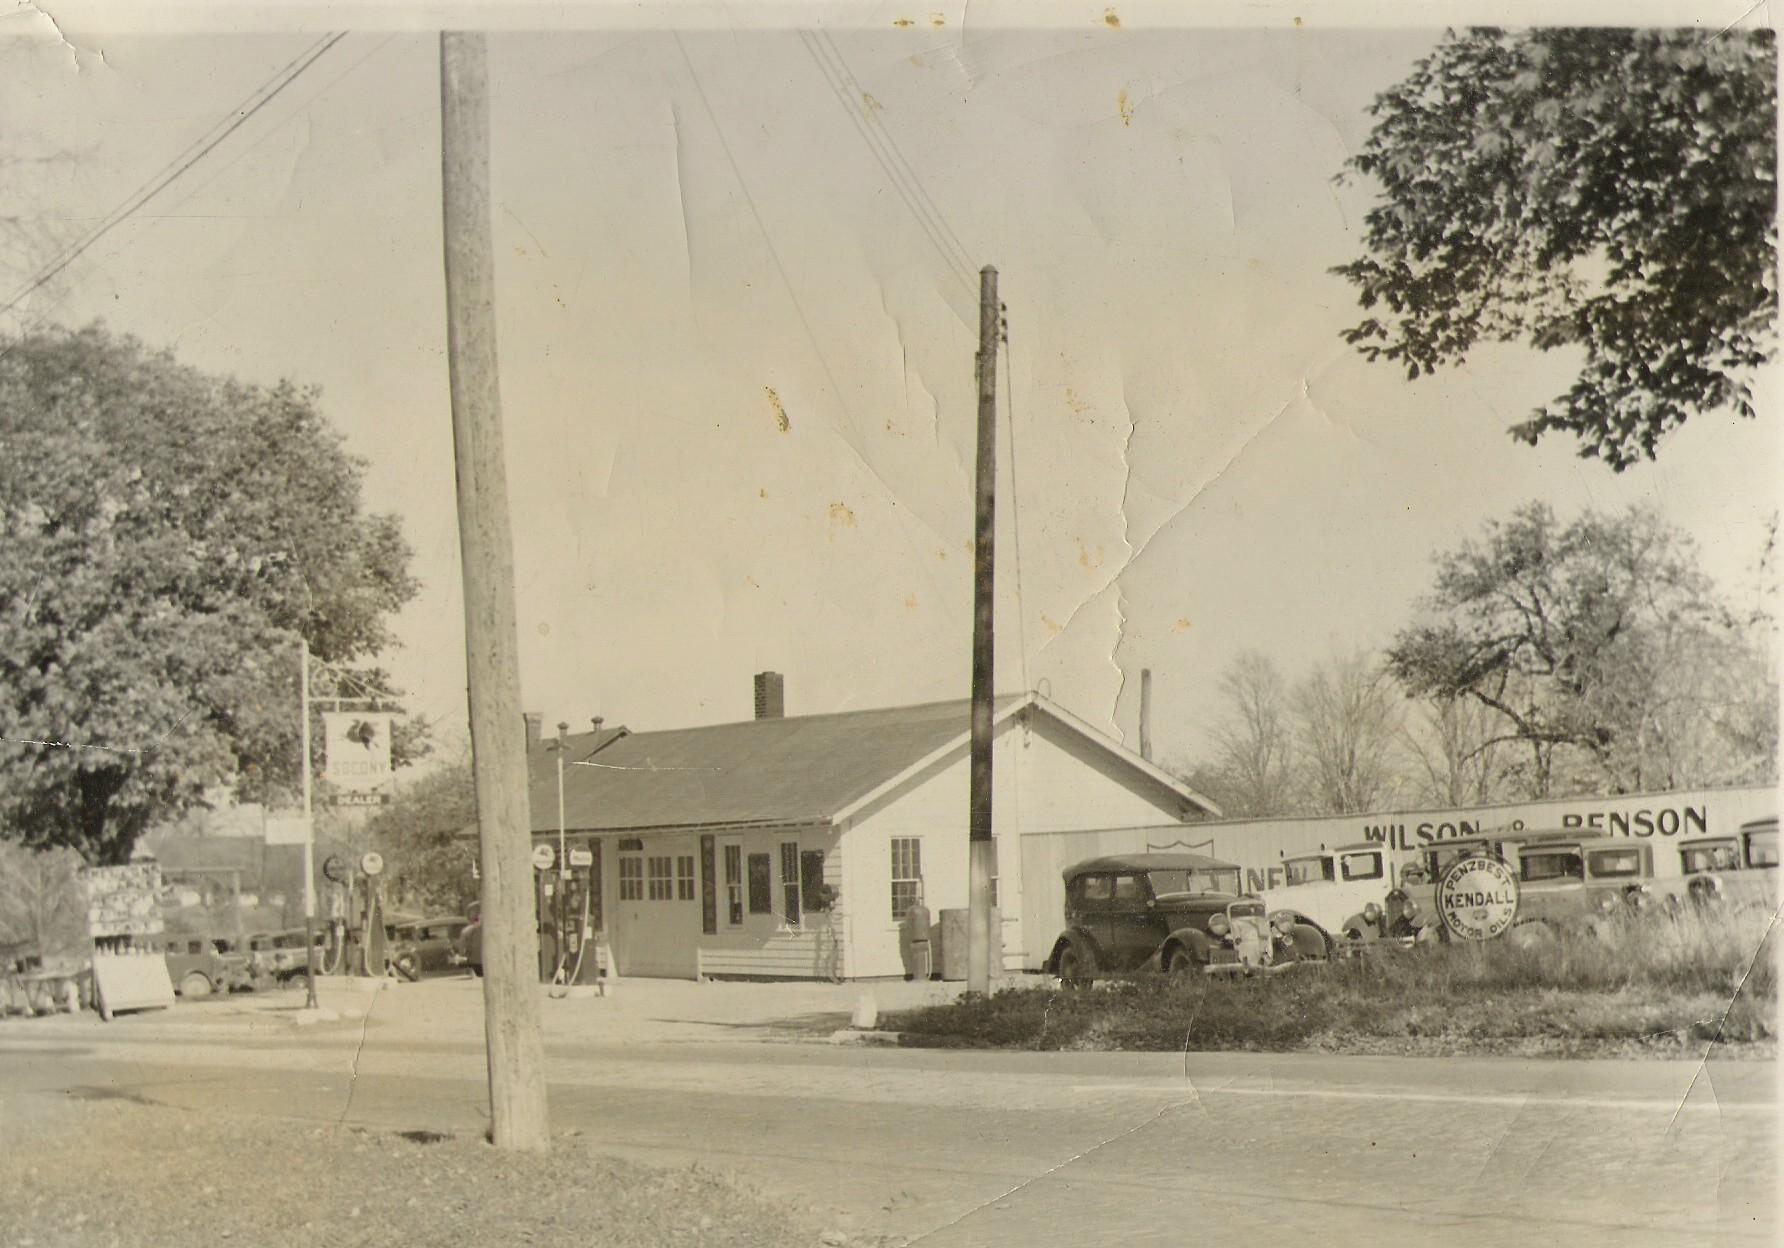 Wilson Auto store from 1937, when it was called Wilson & Benson.